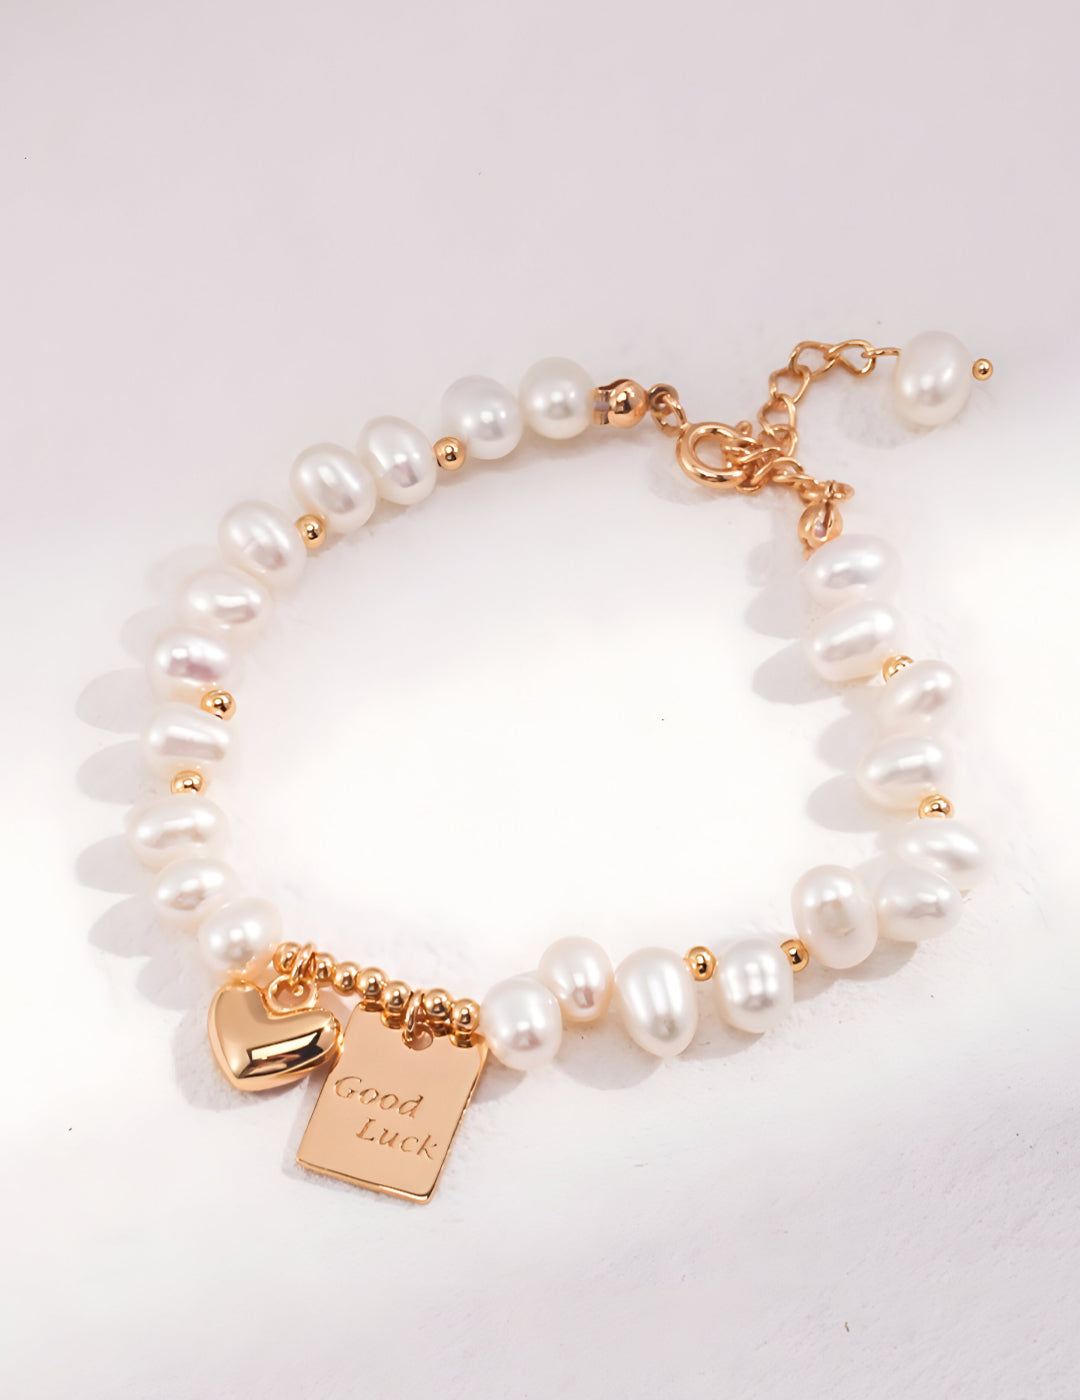 Pearl Bracelet for good fortune - S925 Sterling Silver with18K Gold Vermeil  - Pearl Luminance - Embrace luck on your wrist with intricately designed charms that make everyday magical